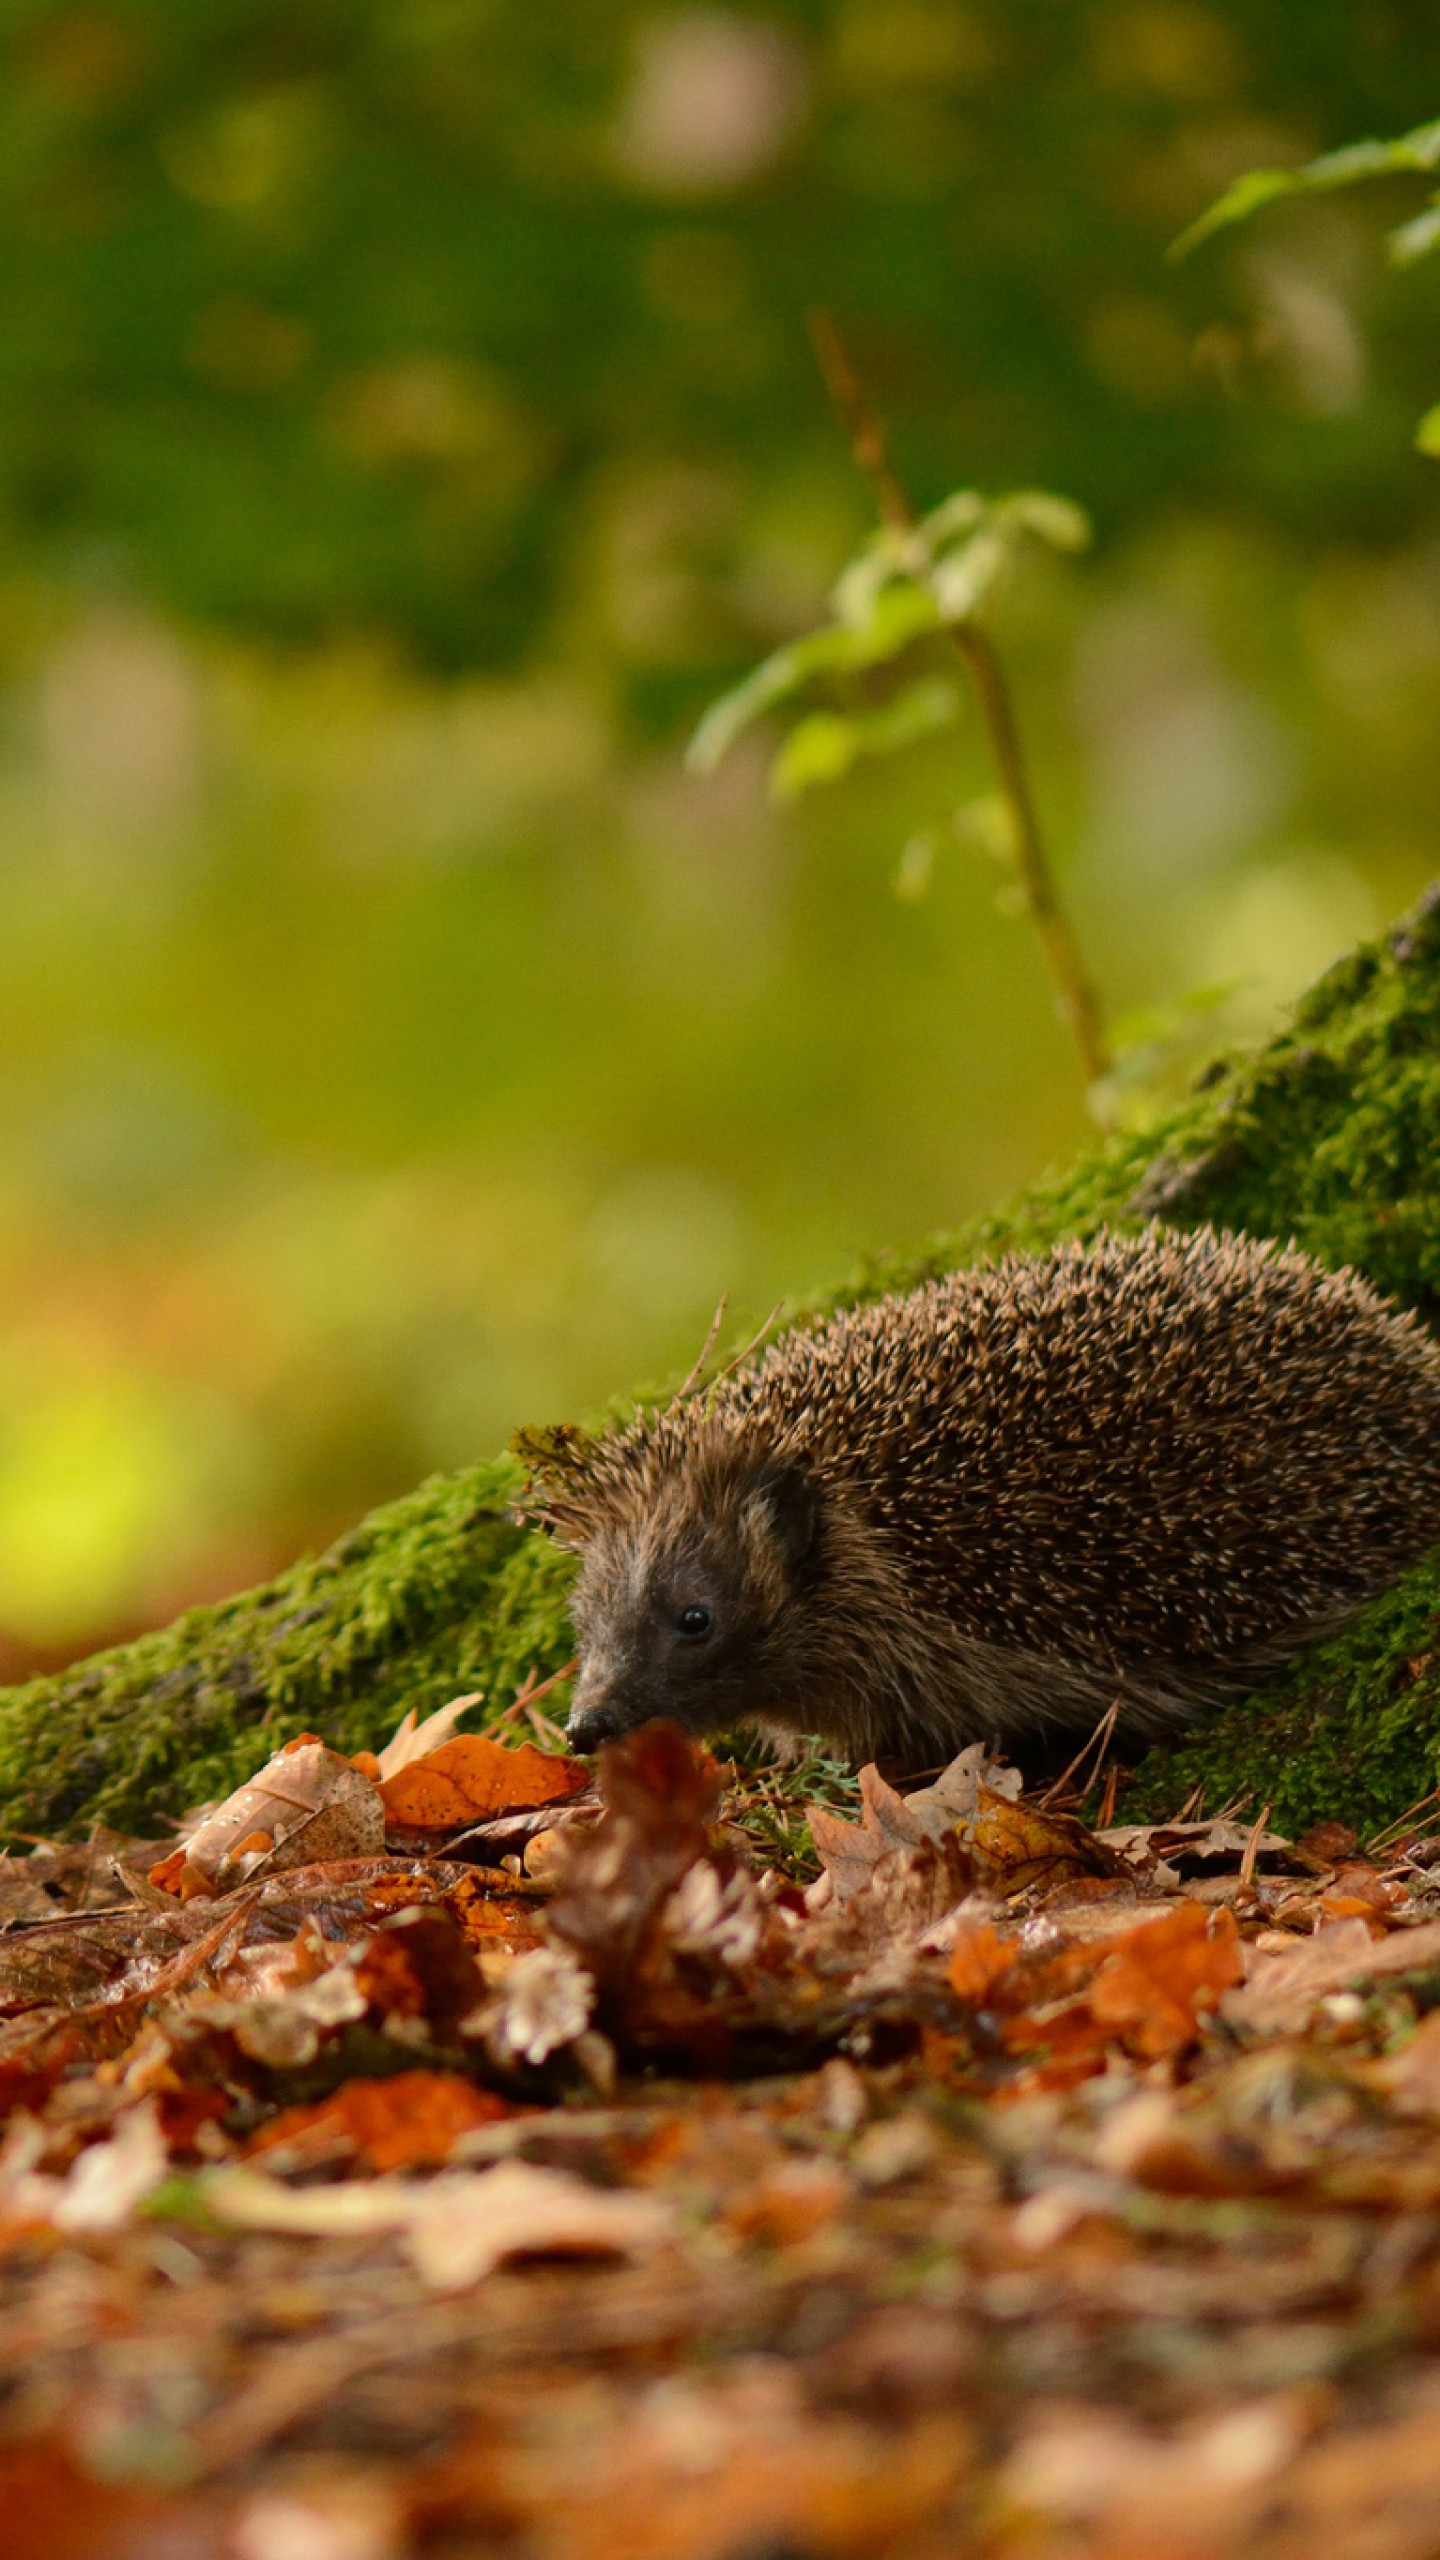 Porcupine in Leafage Autumn - Best HD Wallpapers For iPhone and other